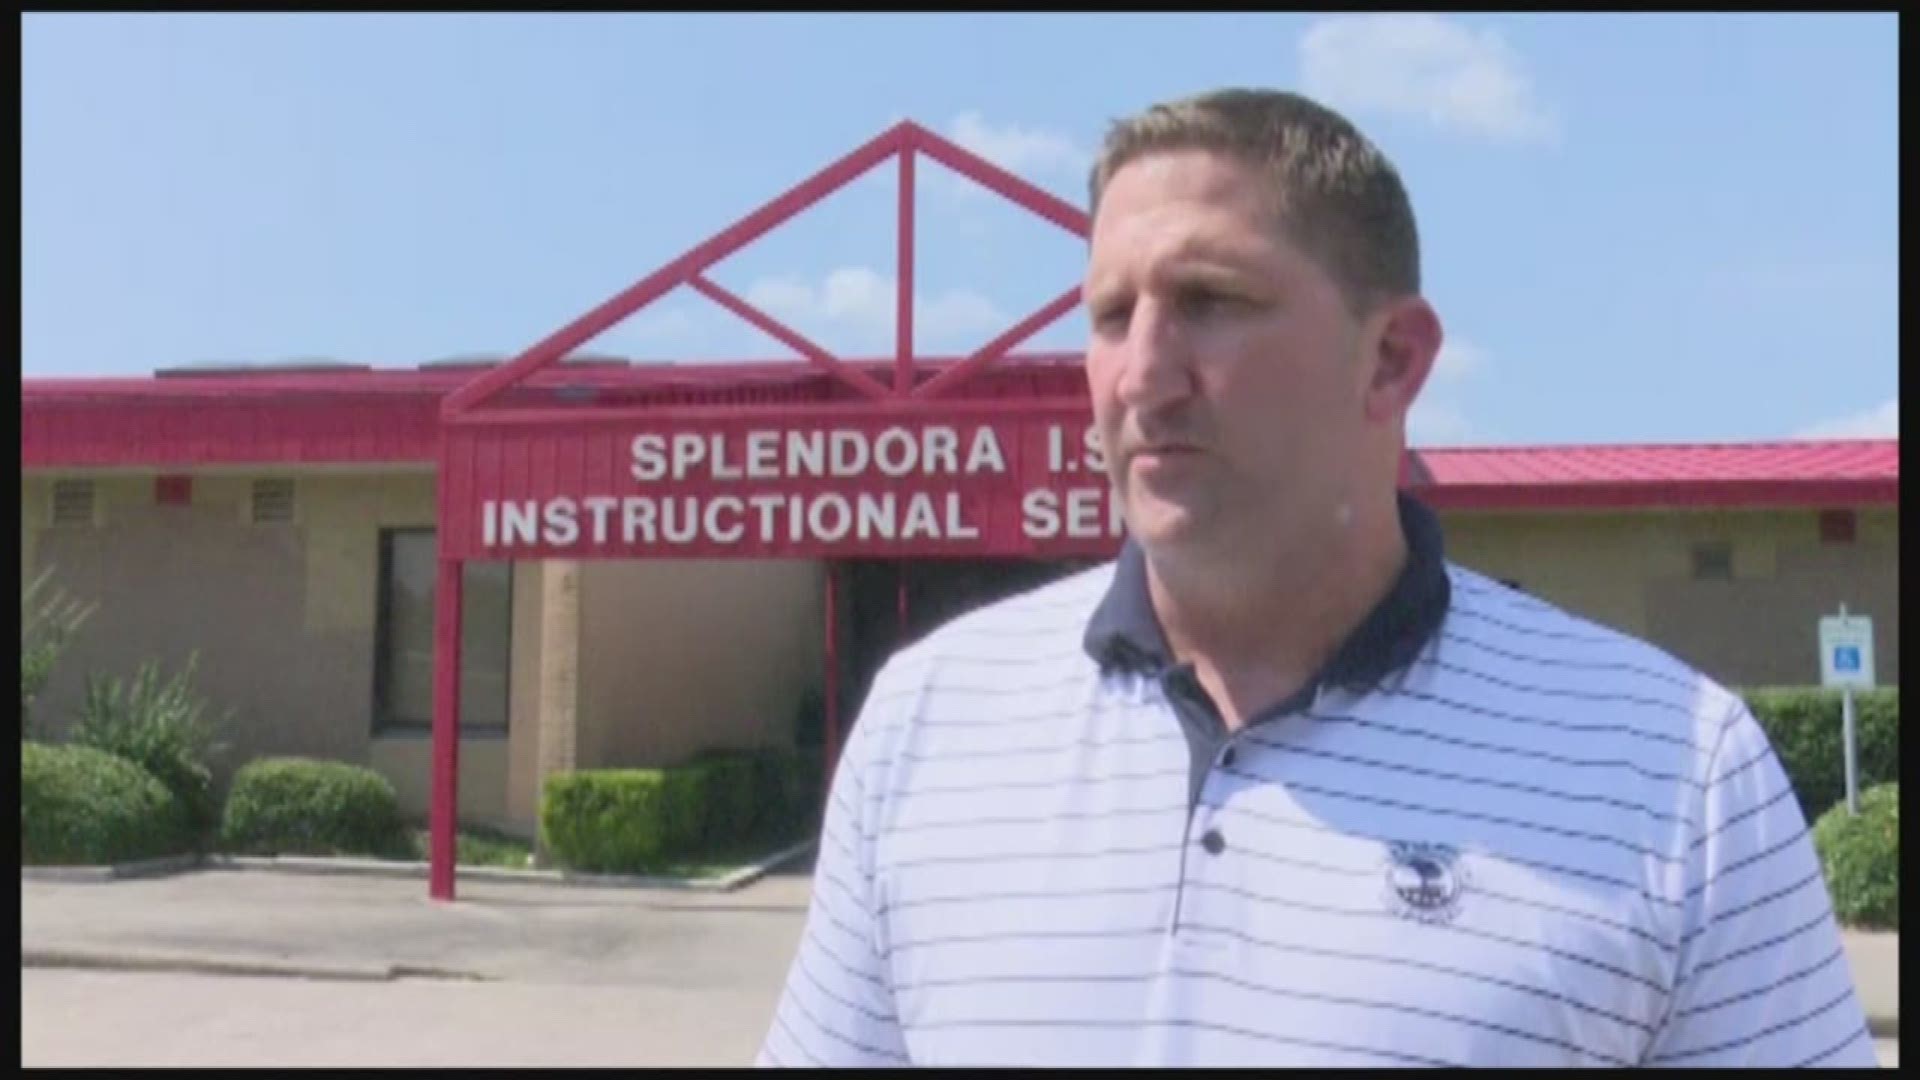 Peach Tree Elementary School students were taken to the emergency room Thursday after Splendora ISD officials say a student brought prescription medication to school and gave it to classmates.